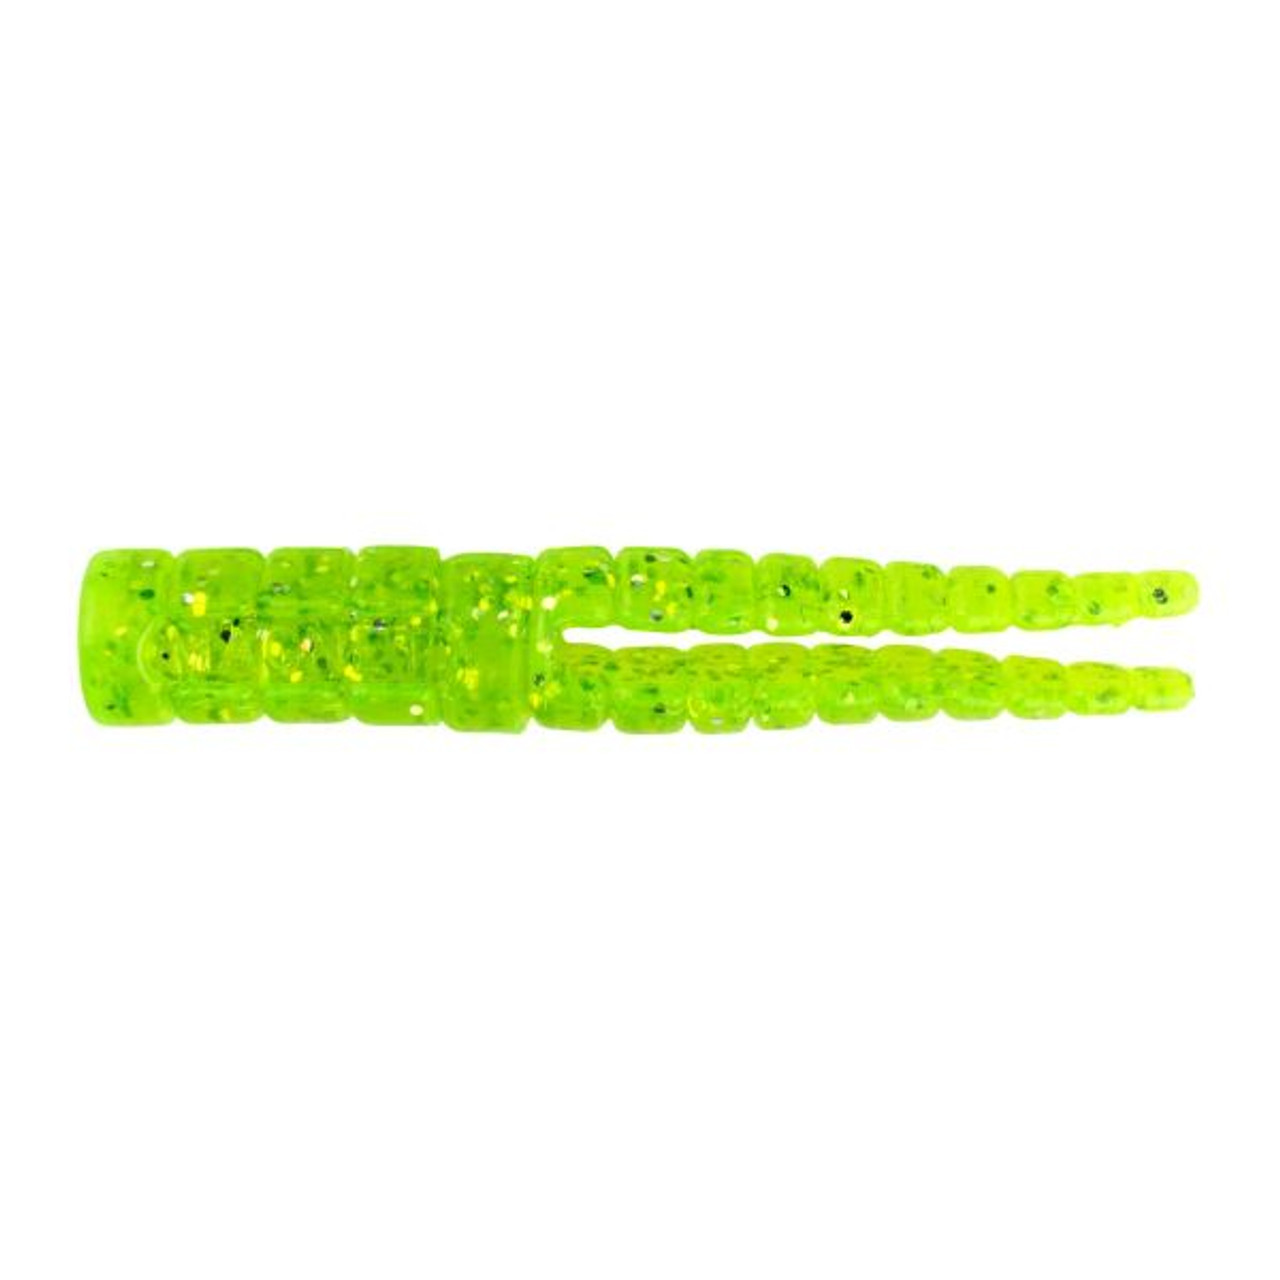 Crappie Magnet 15pc Body Pack-White/Chartreuse